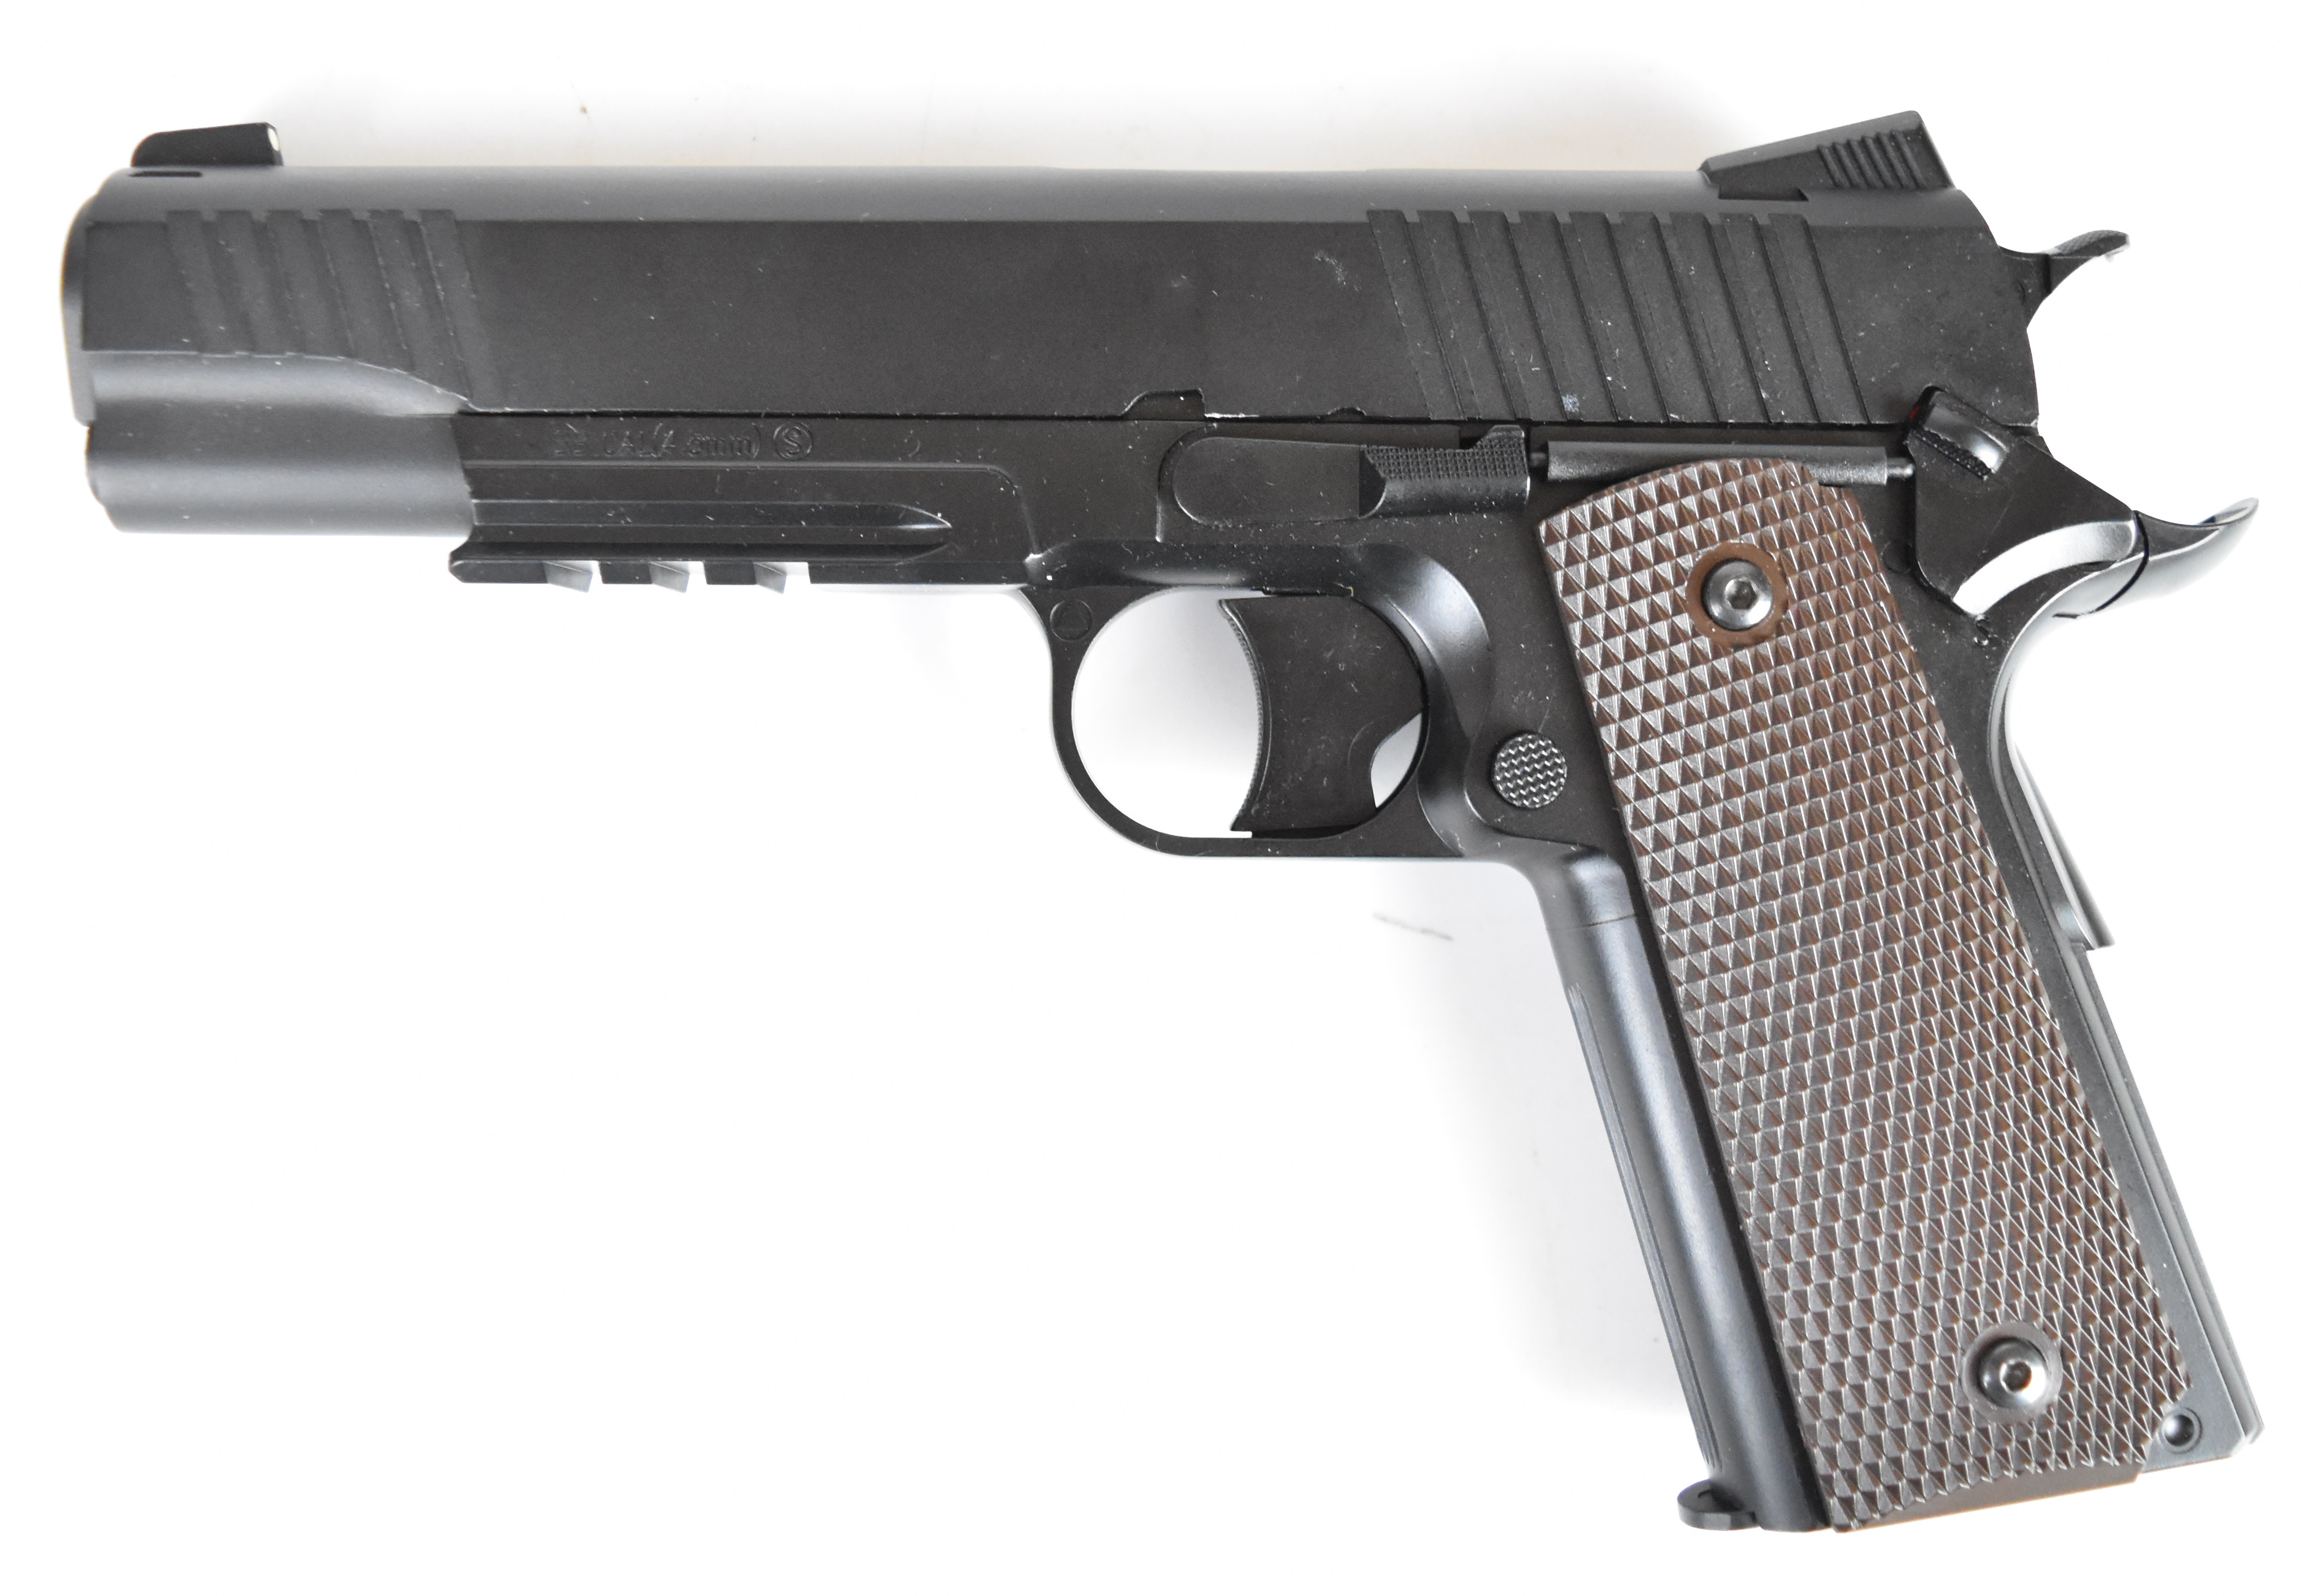 KWC M45 A1 .177 CO2 air pistol with chequered grips and 21 shot magazine, serial number 48016179, in - Image 3 of 12